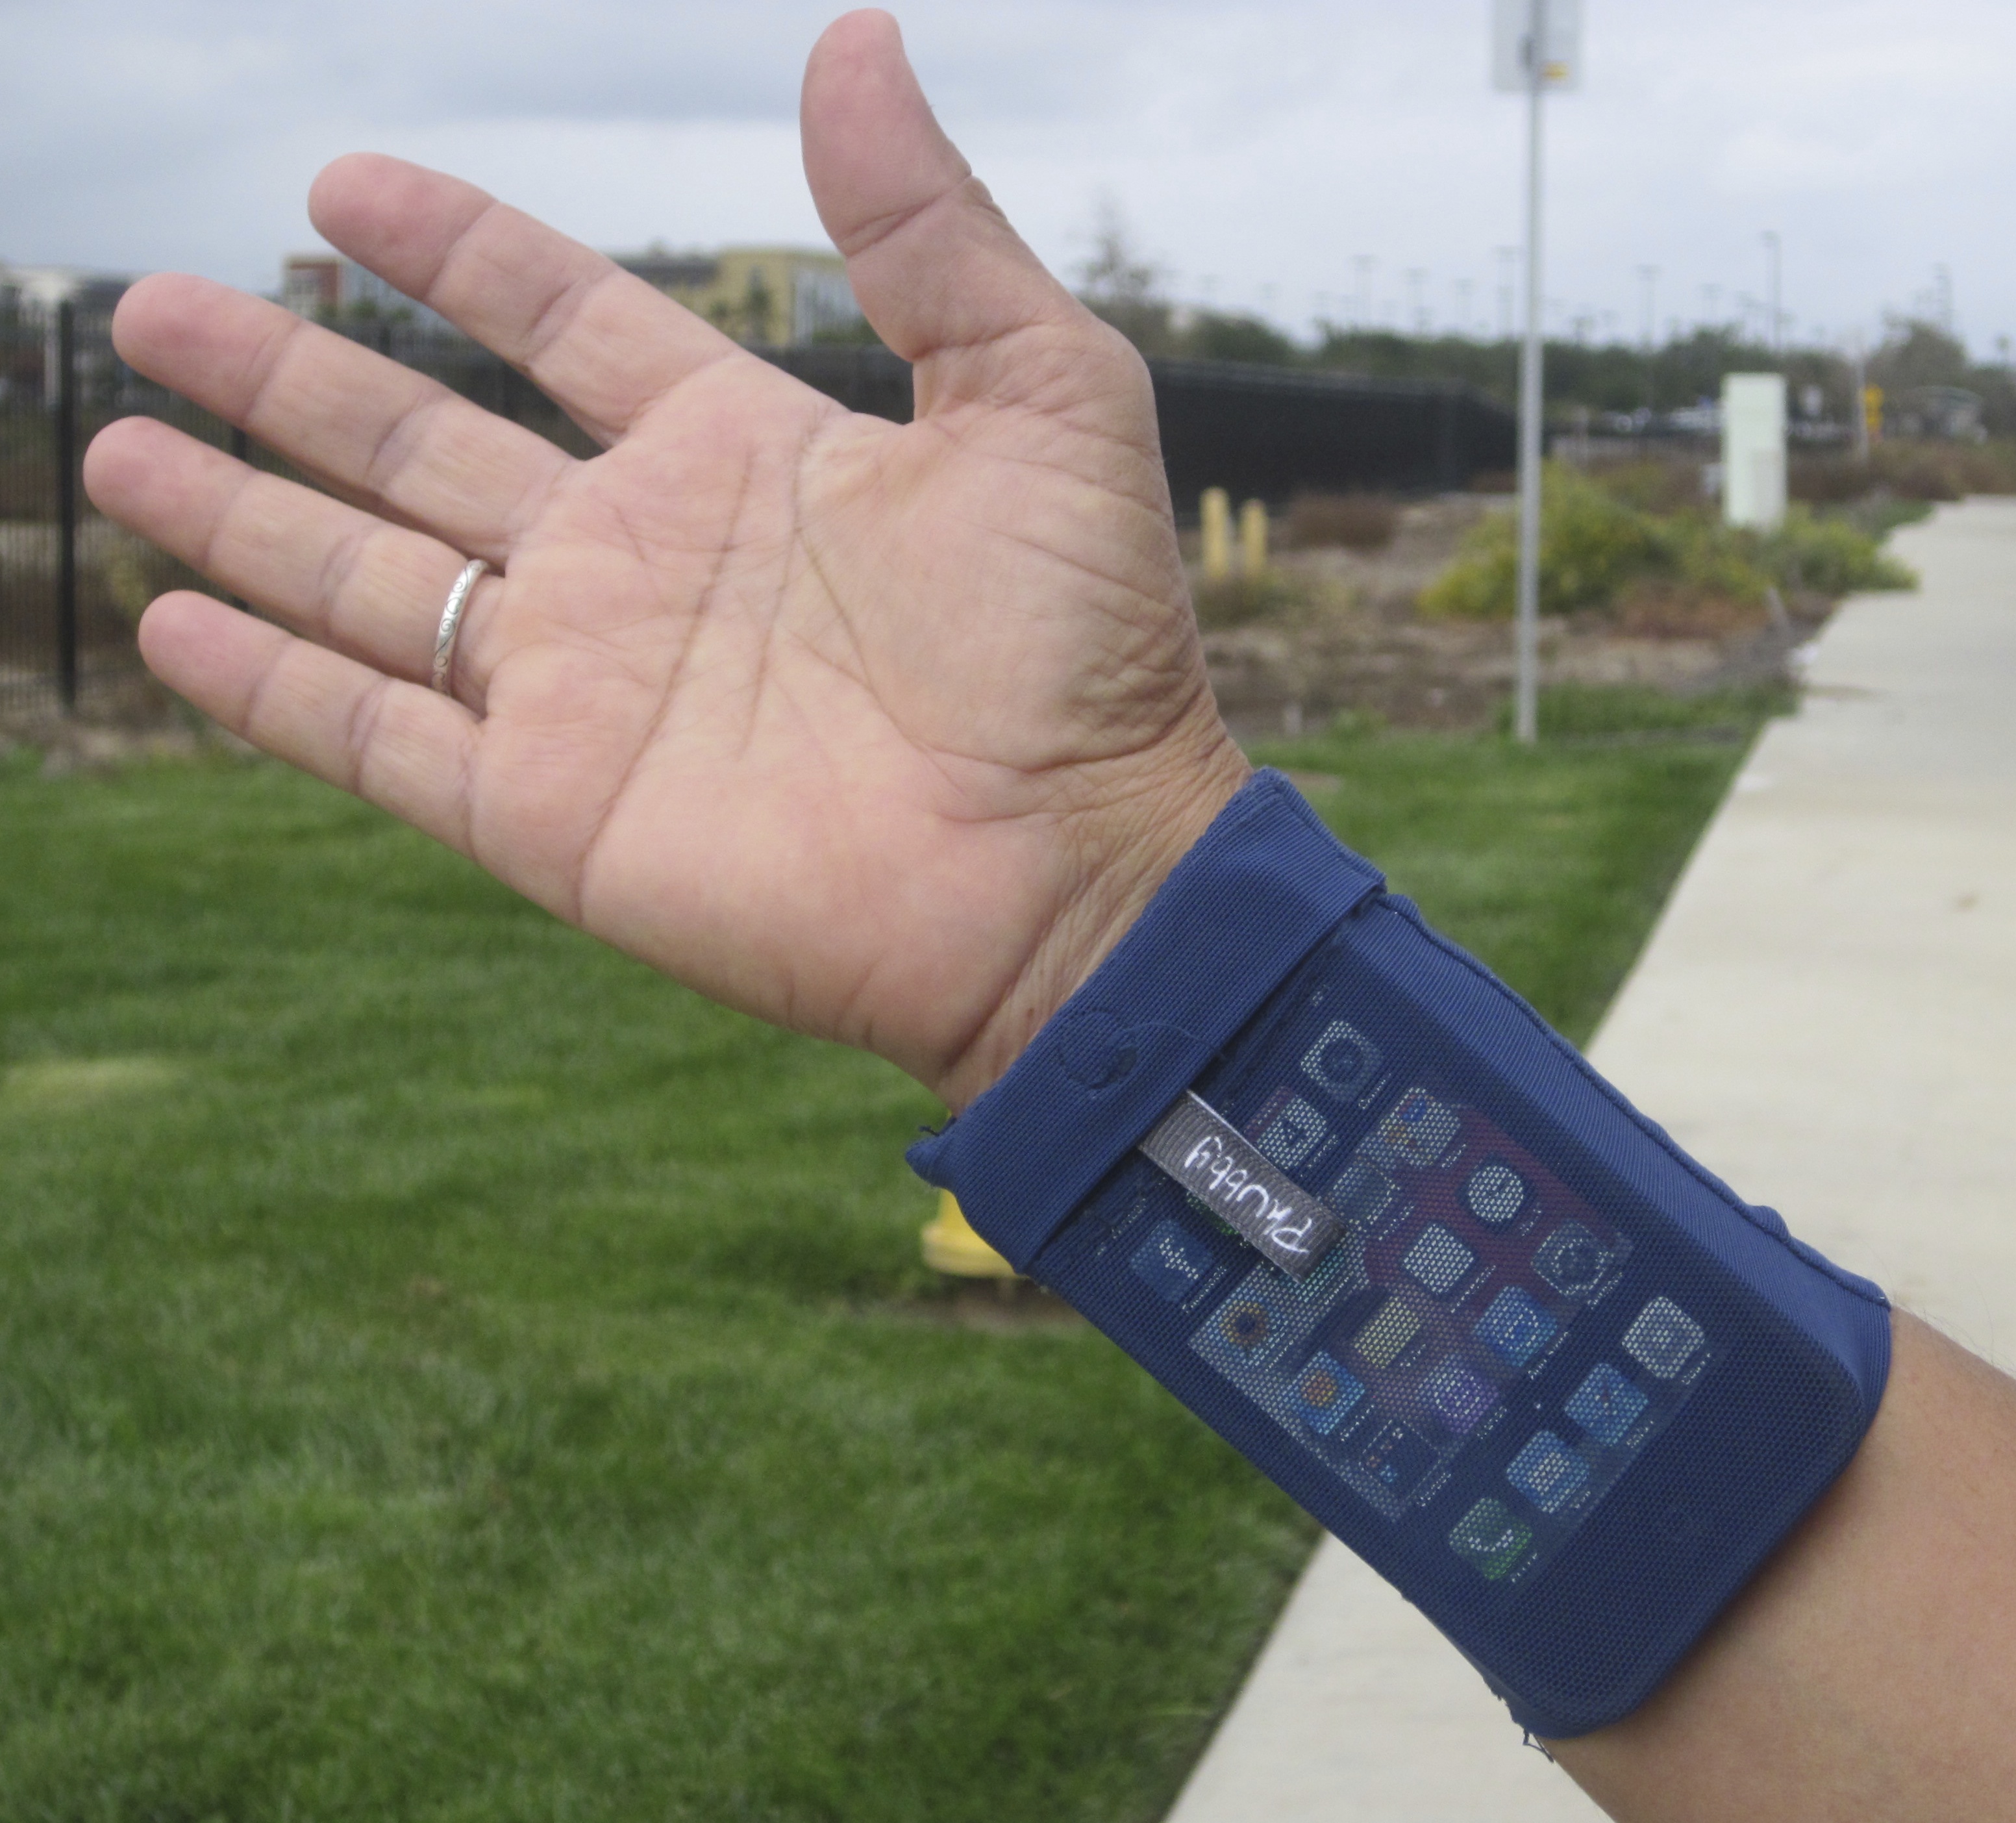 Phubby Wrist Cell Phone Holder Will Be Demonstrated At La Pine, Oregon